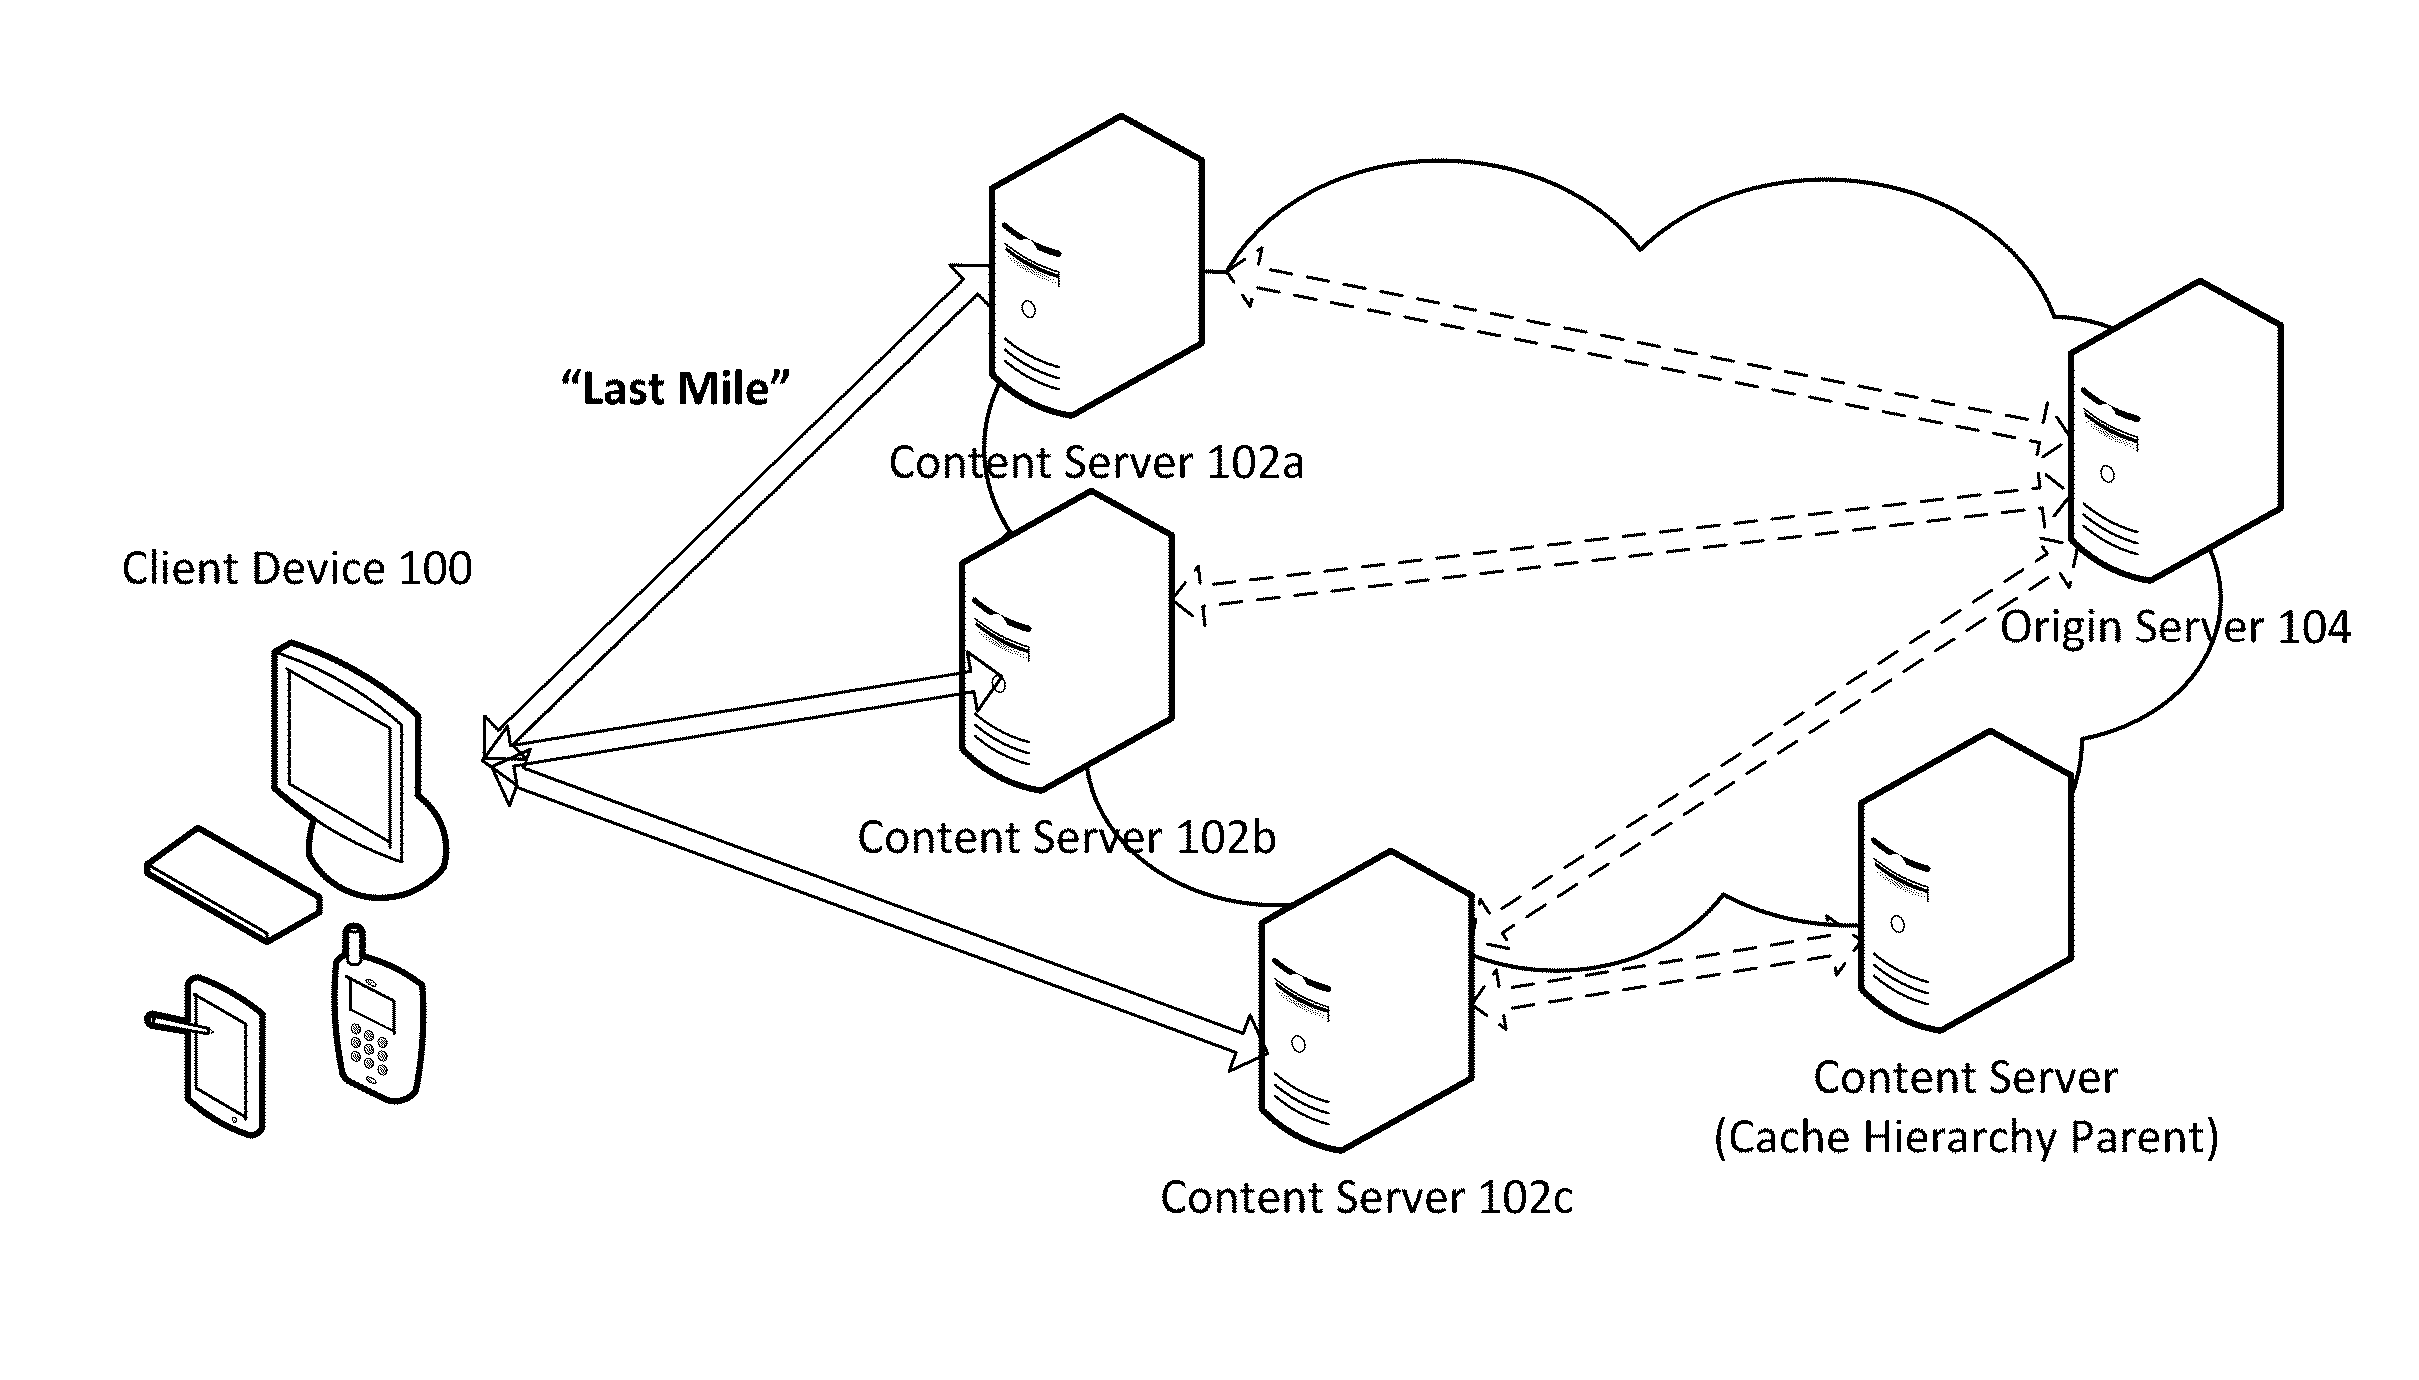 Server initiated multipath content delivery